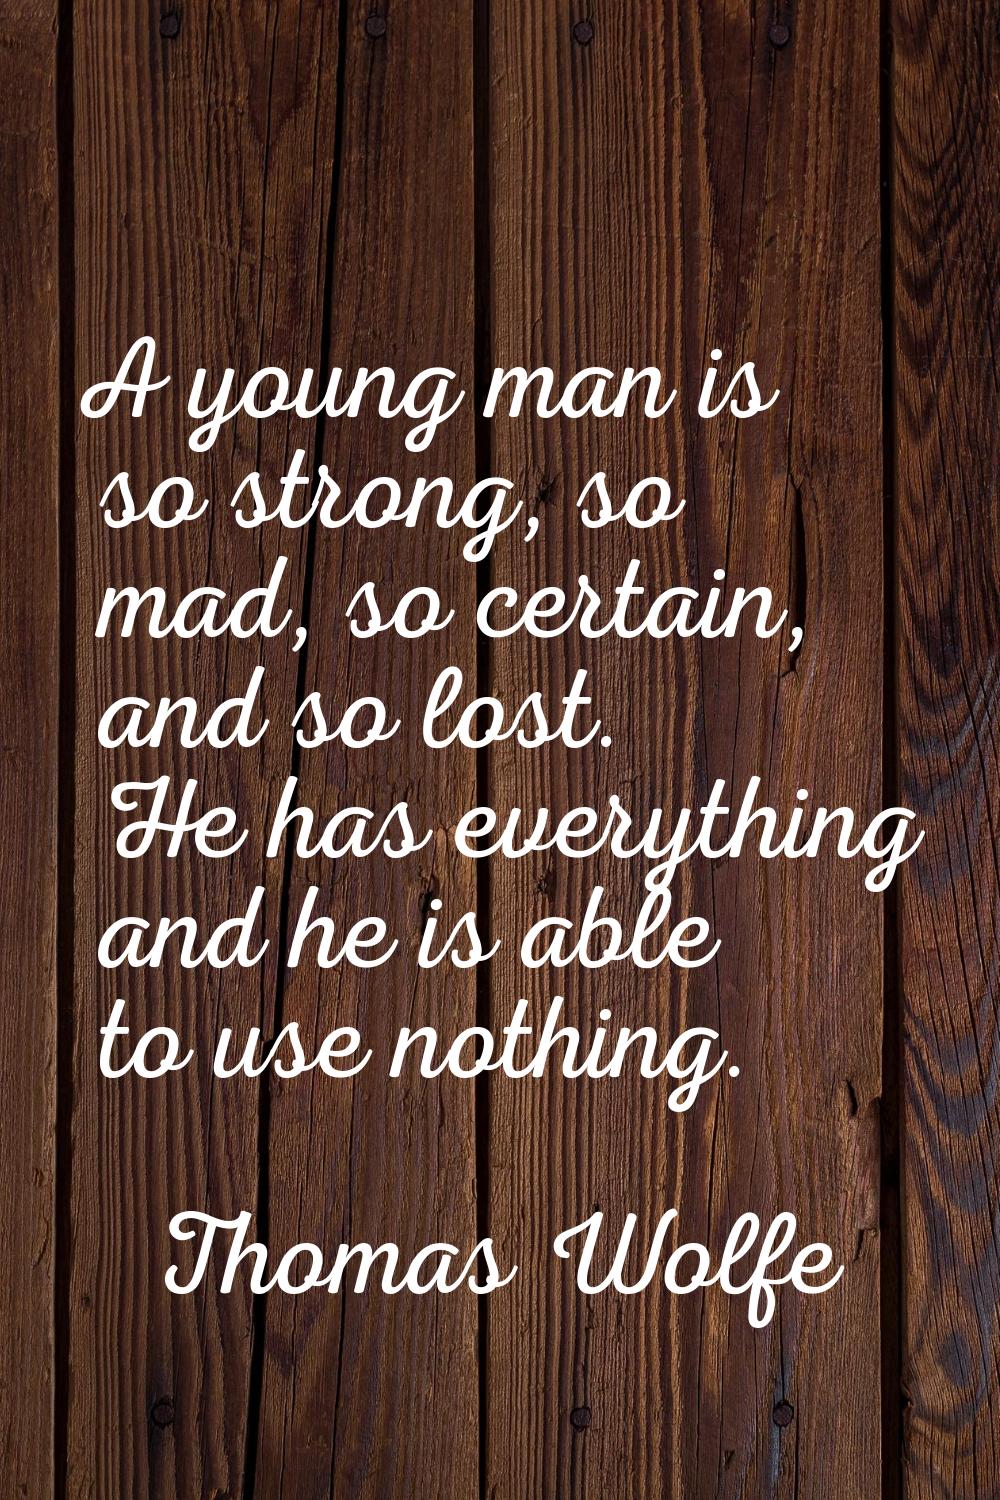 A young man is so strong, so mad, so certain, and so lost. He has everything and he is able to use 